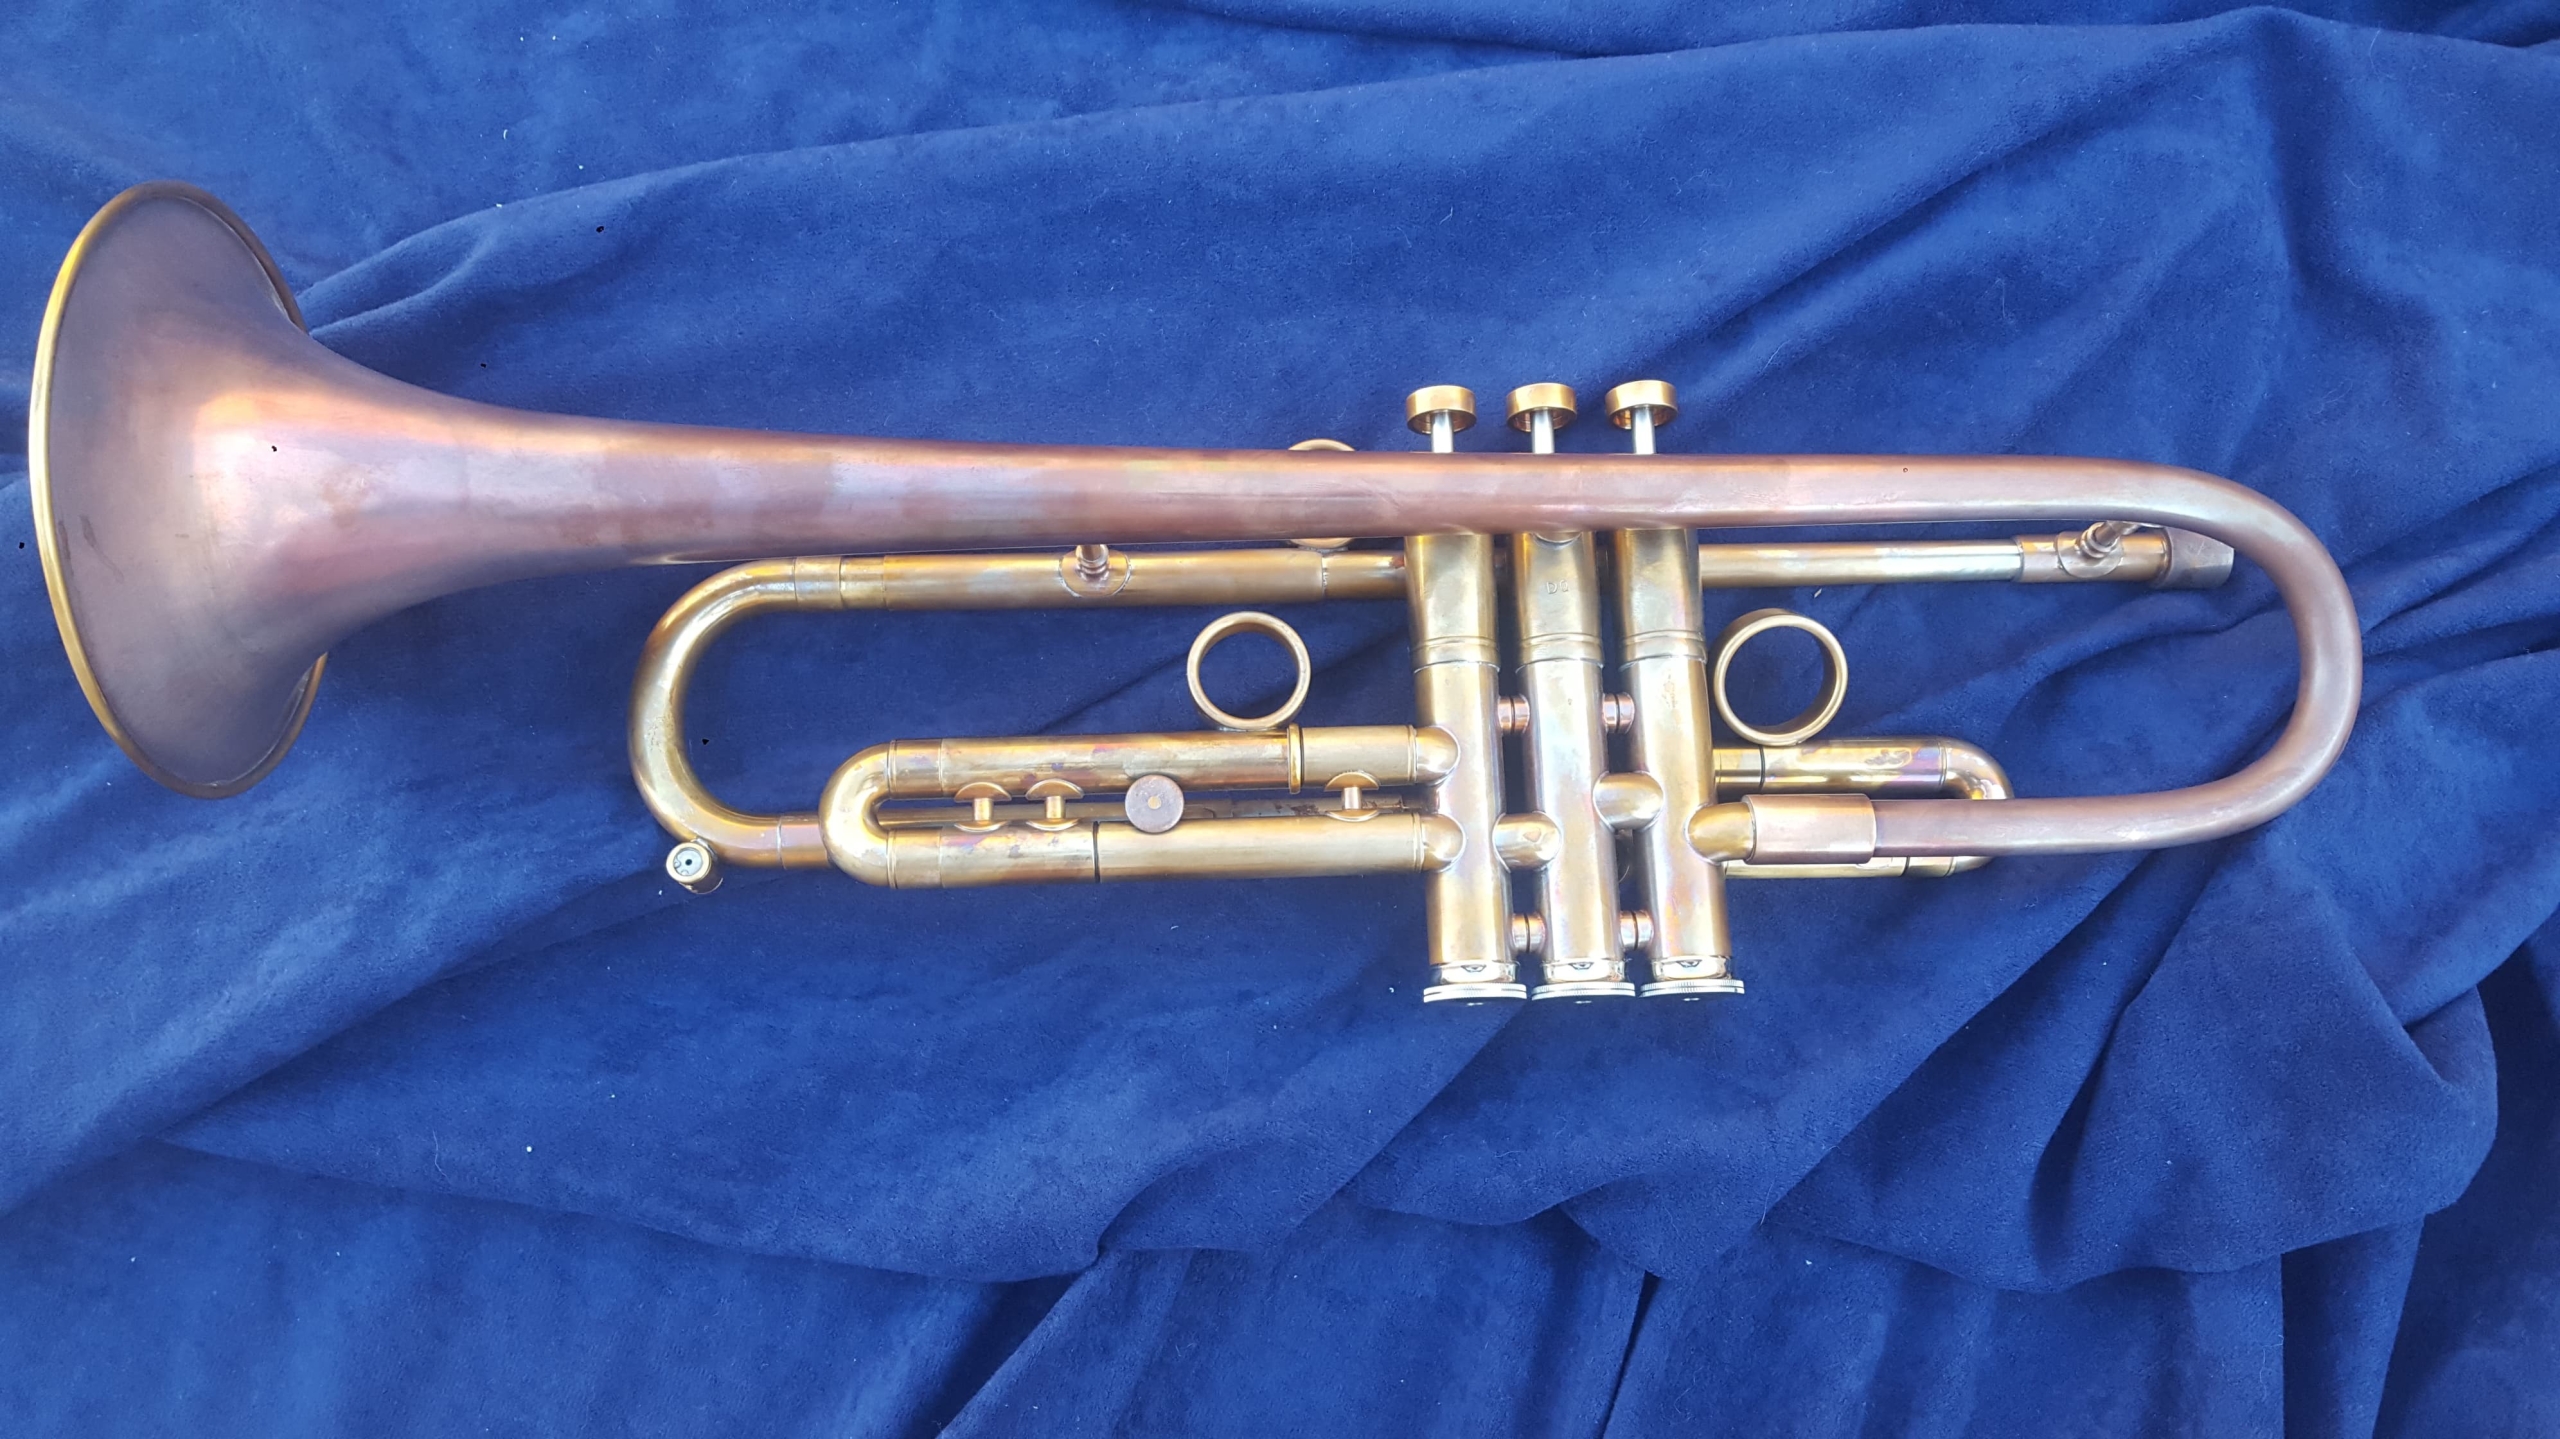 Del Quadro Custom Grizzly Trumpet with an Acid Finish